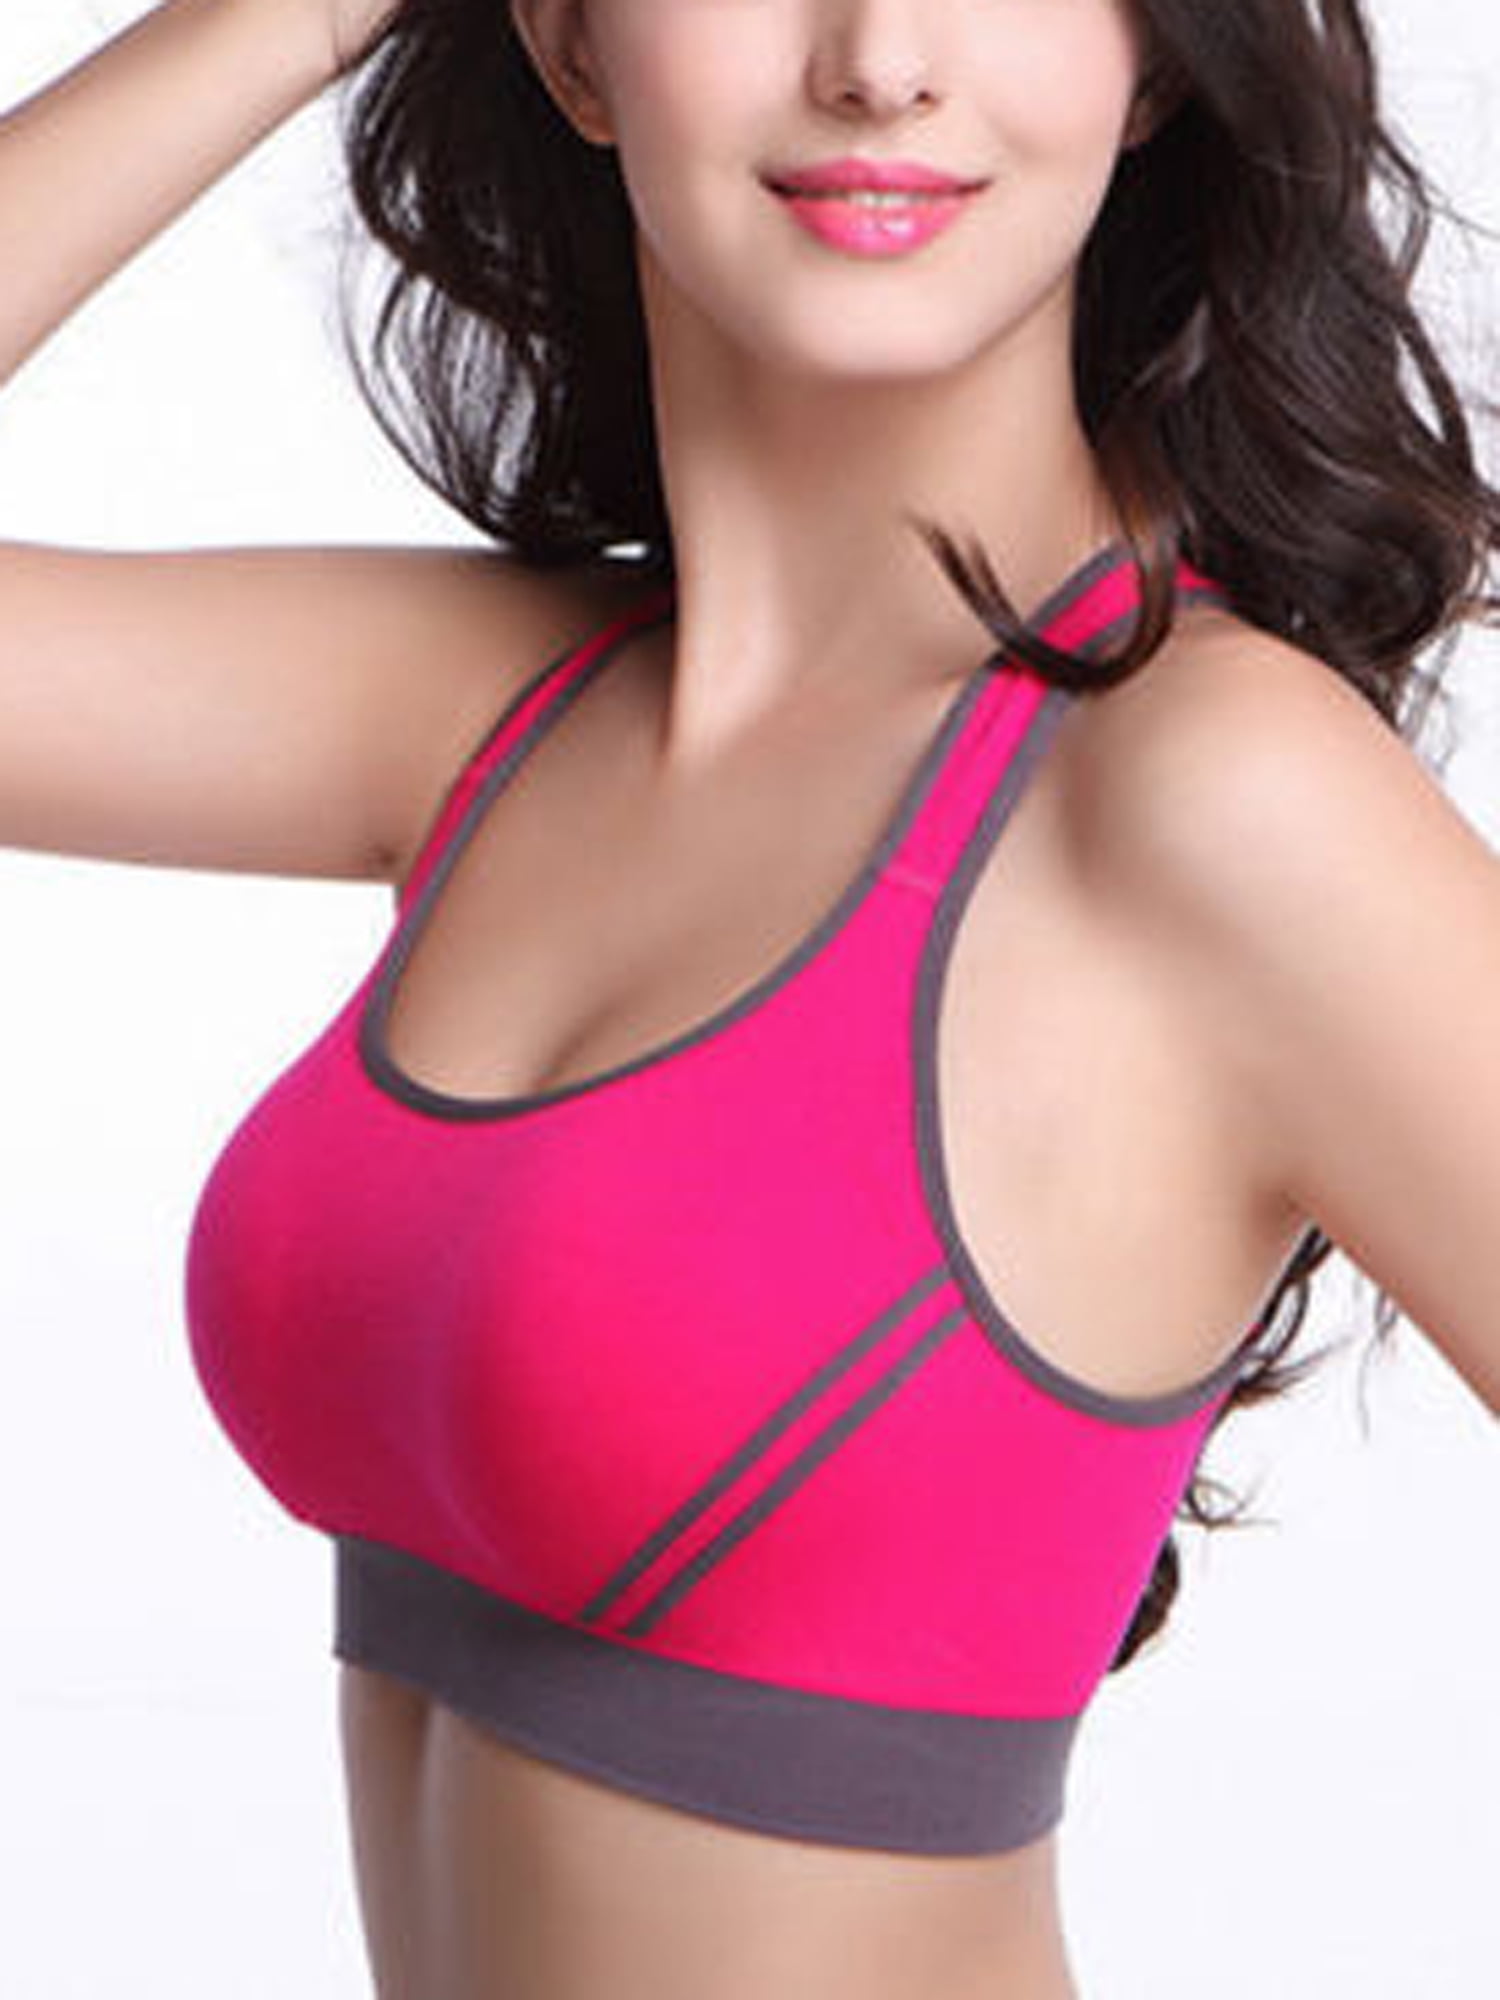 ActrovaX XLL Sports Bra for Workouts Women Sports Non Padded Bra - Buy  ActrovaX XLL Sports Bra for Workouts Women Sports Non Padded Bra Online at  Best Prices in India